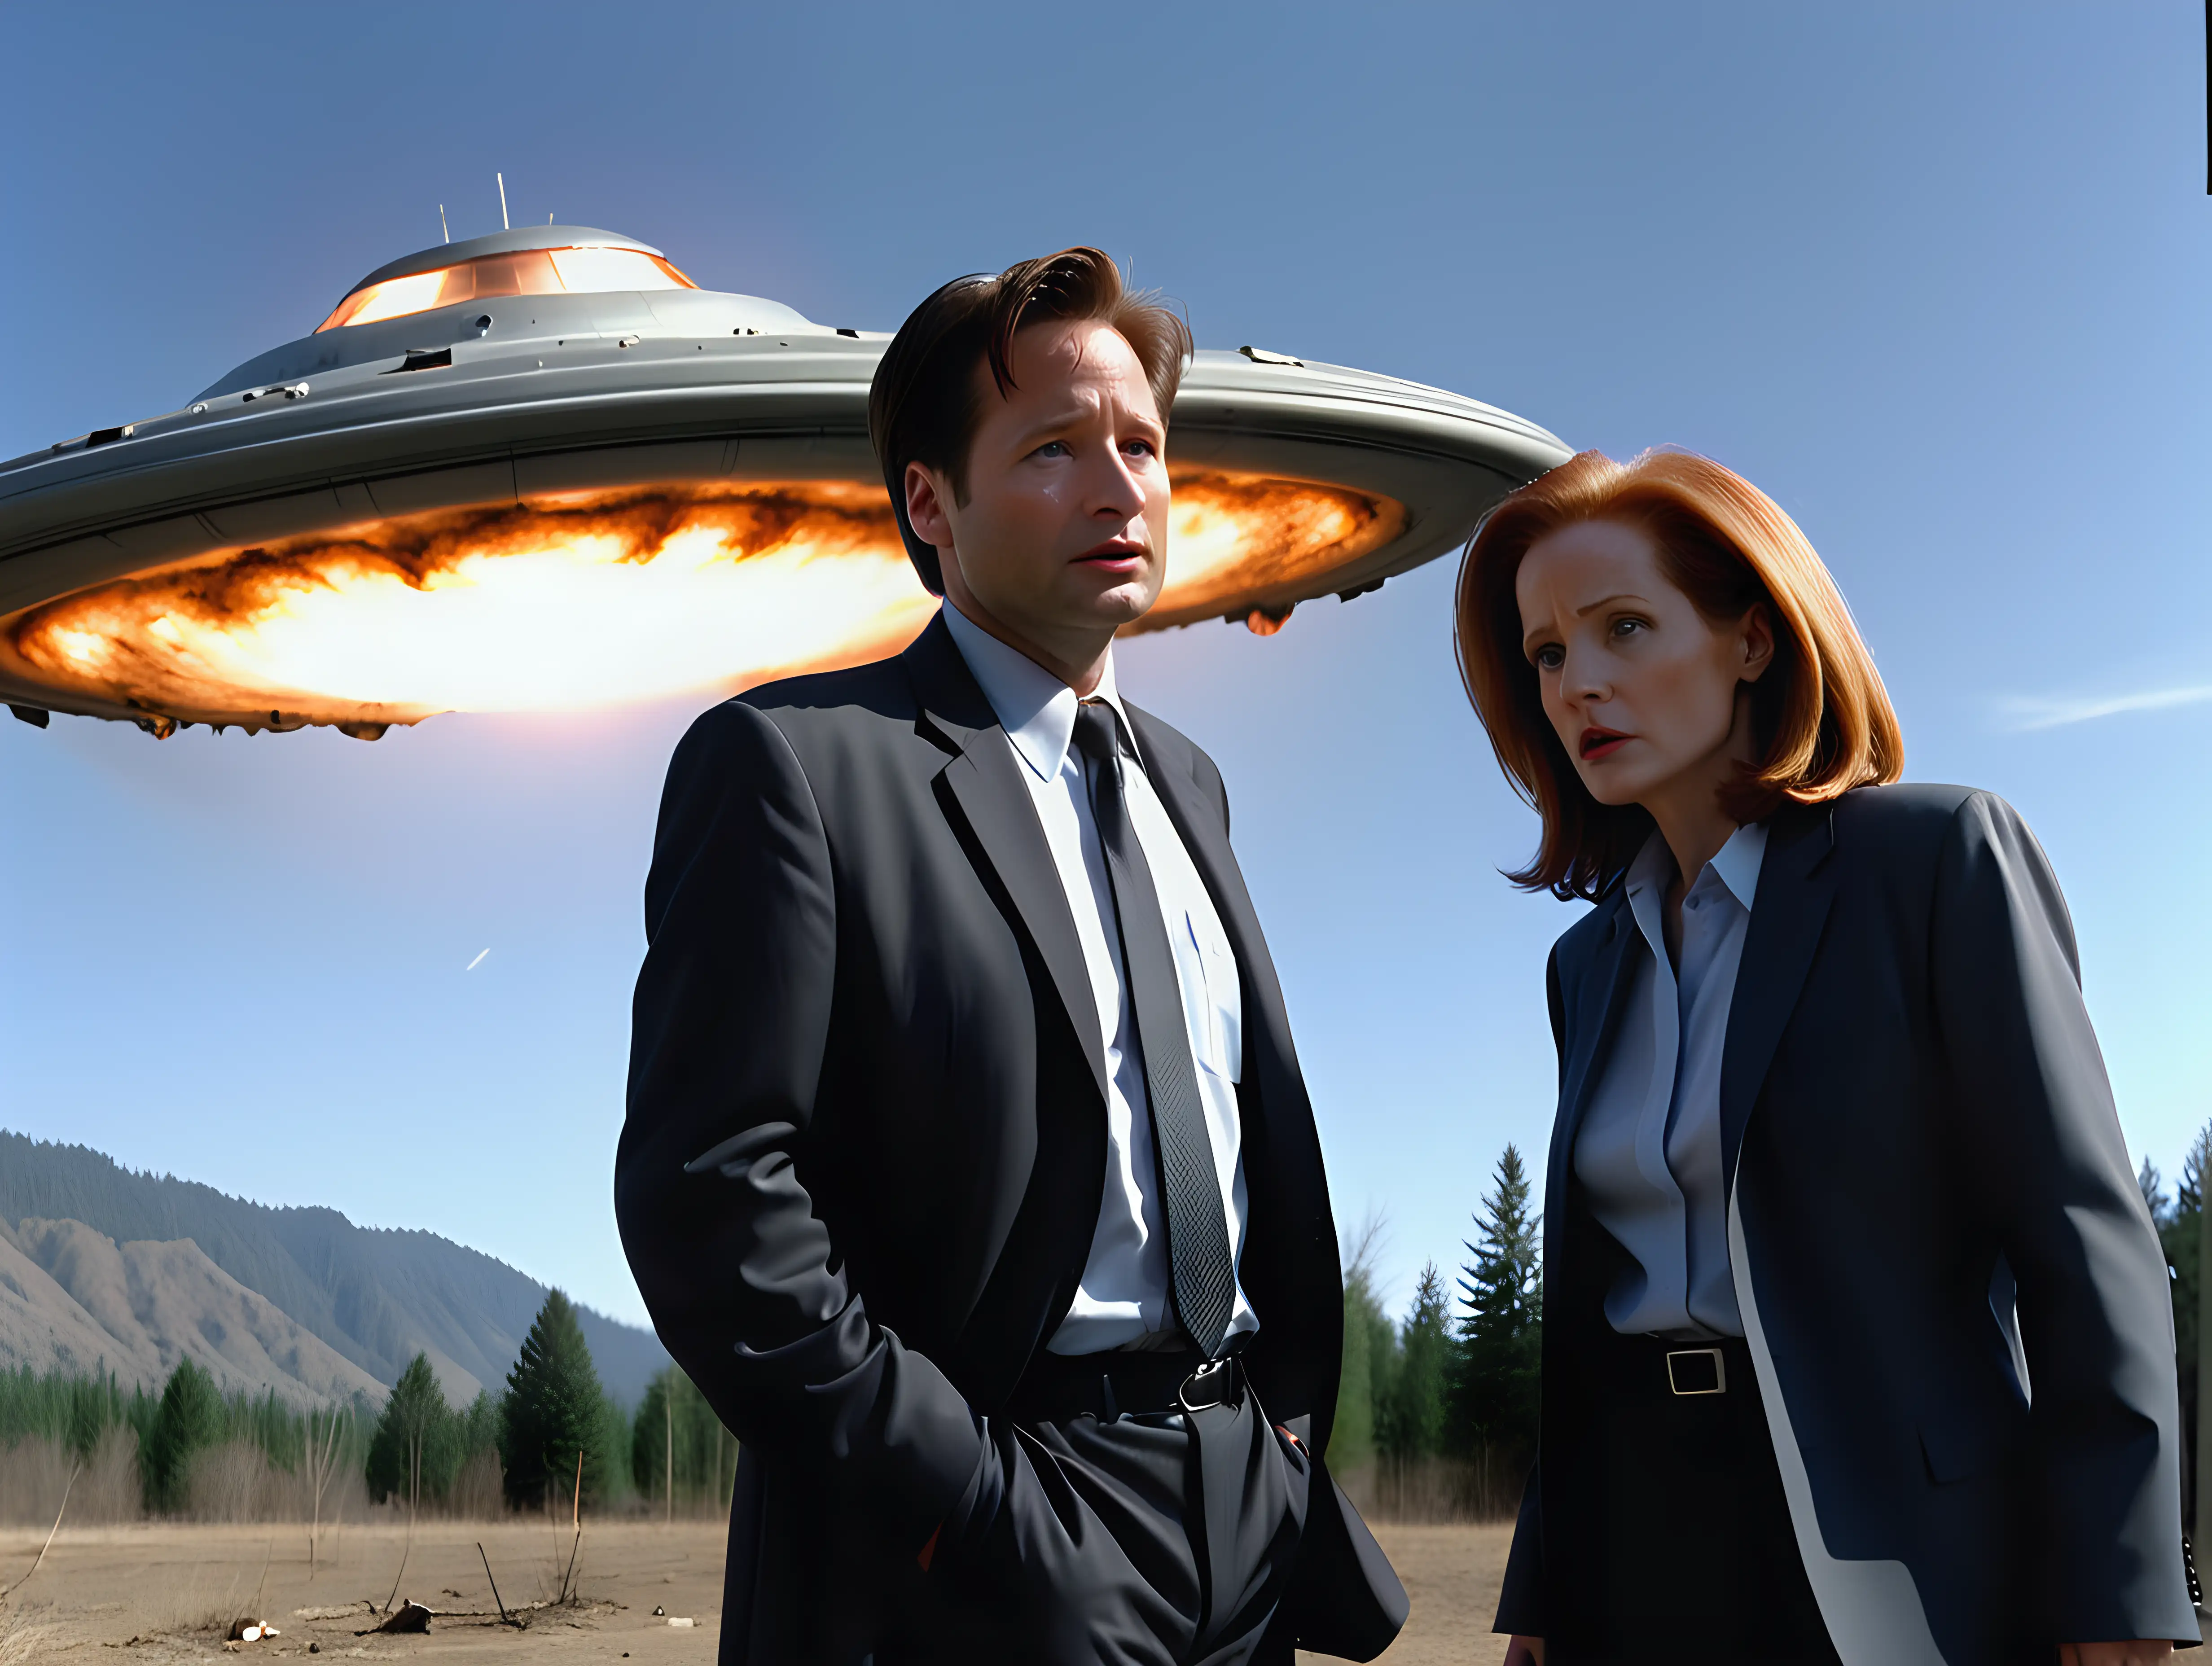 Mulder and Scully investigating a UFO crash